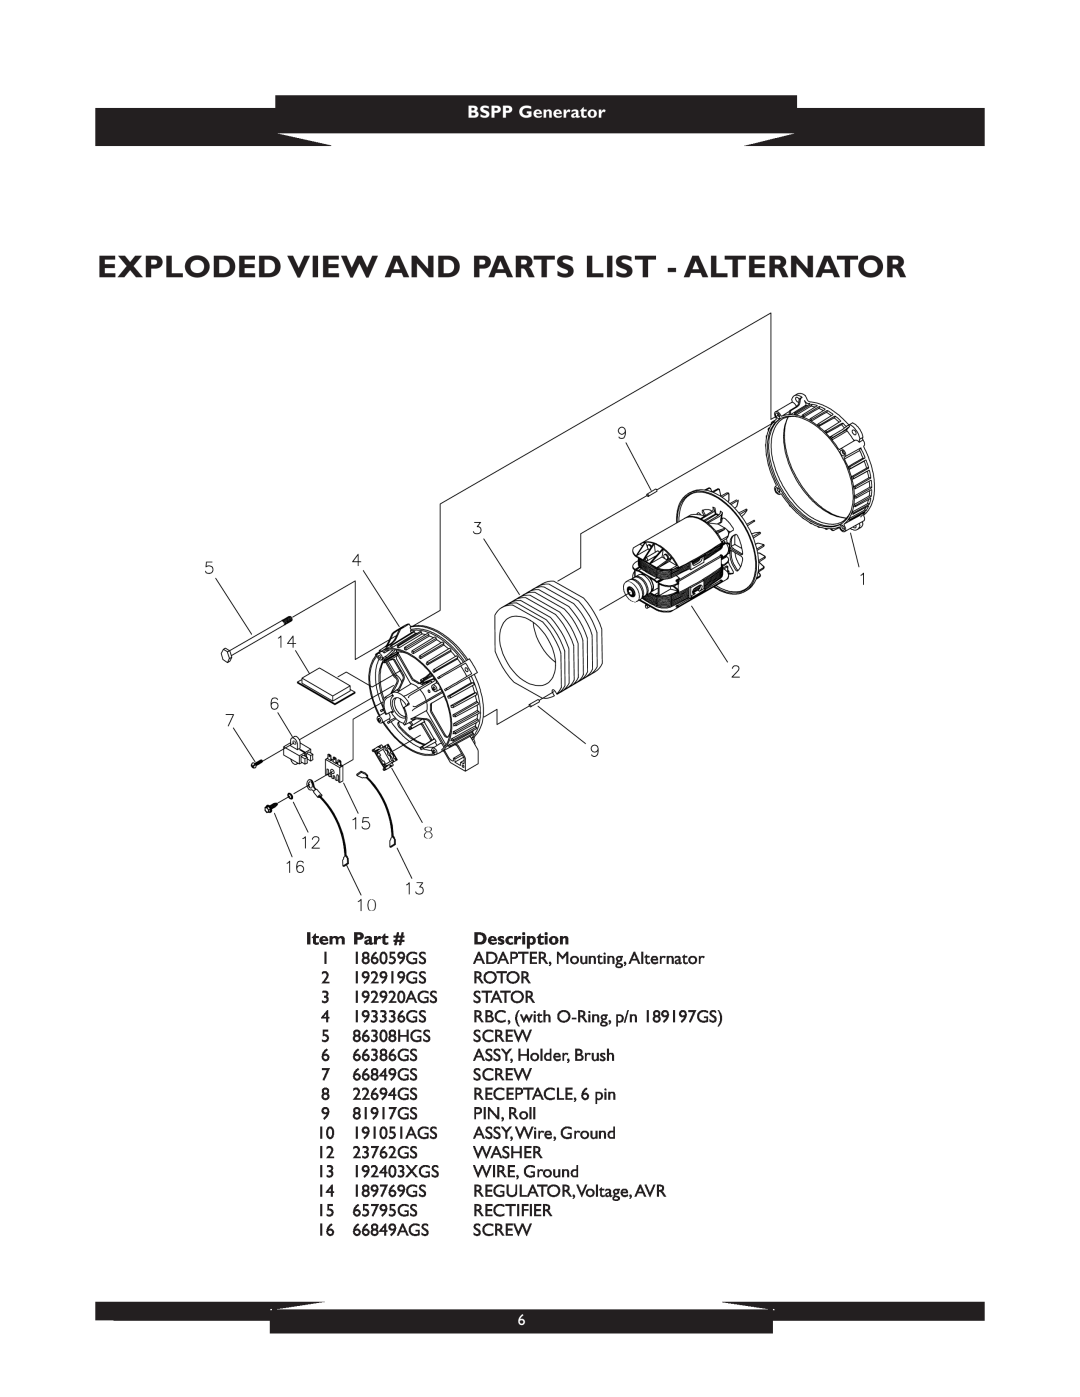 Briggs & Stratton 1933 manual Exploded View And Parts List - Alternator, BSPP Generator, Description 